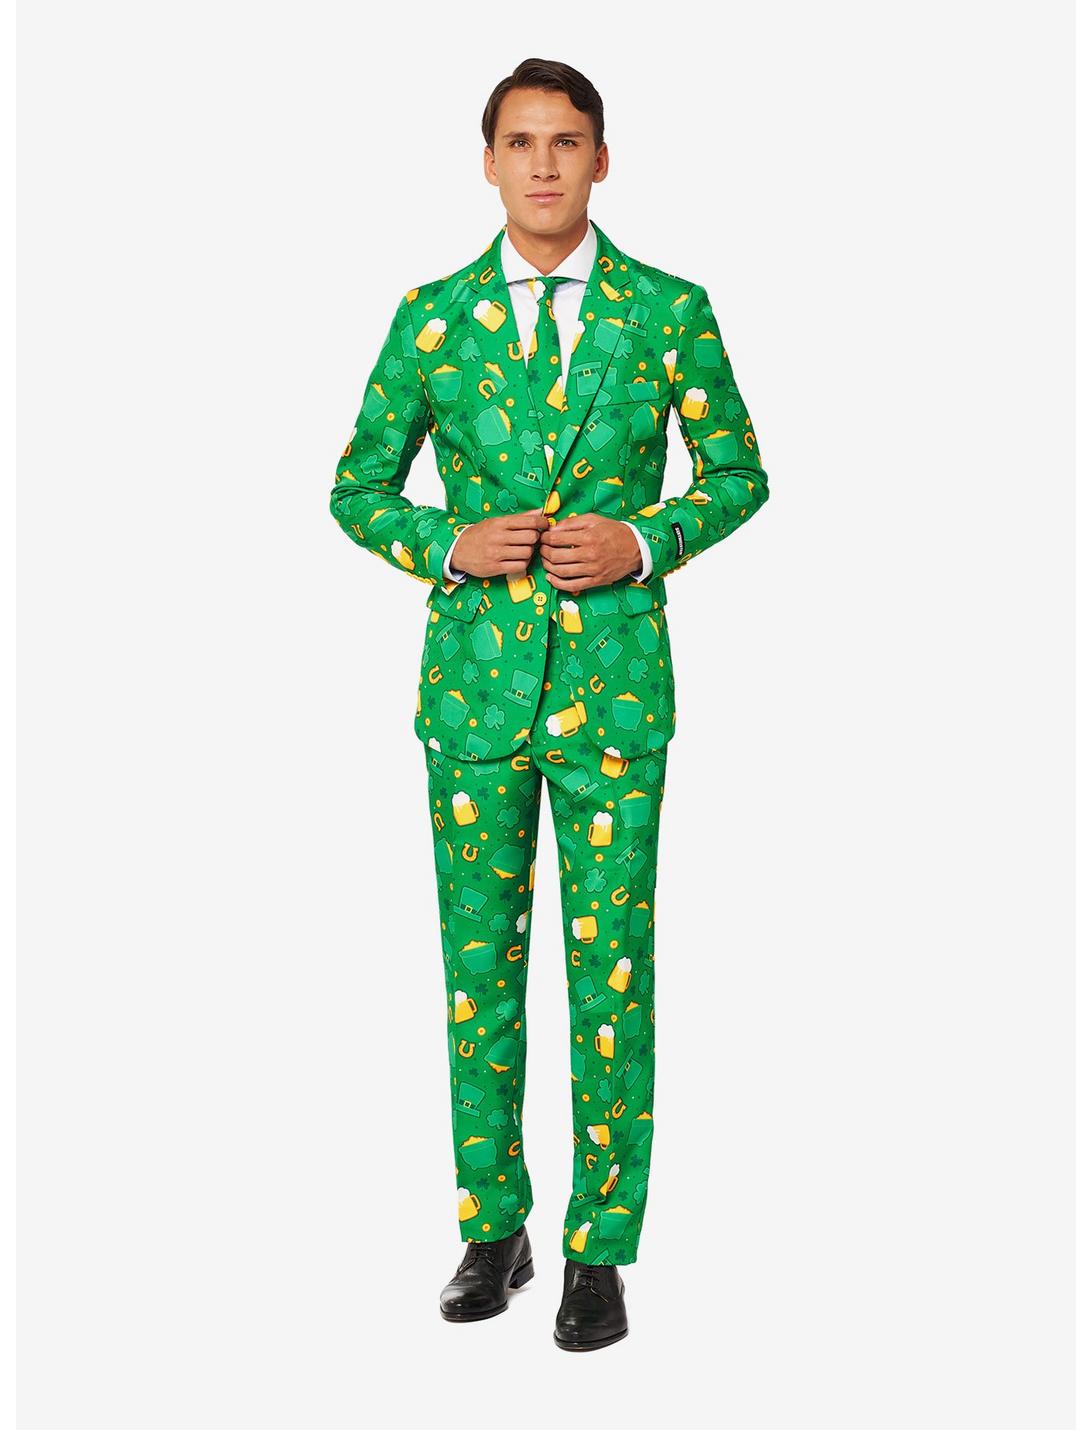 Suitmeister Men's St. Patrick's Day Suit, GREEN  YELLOW, hi-res